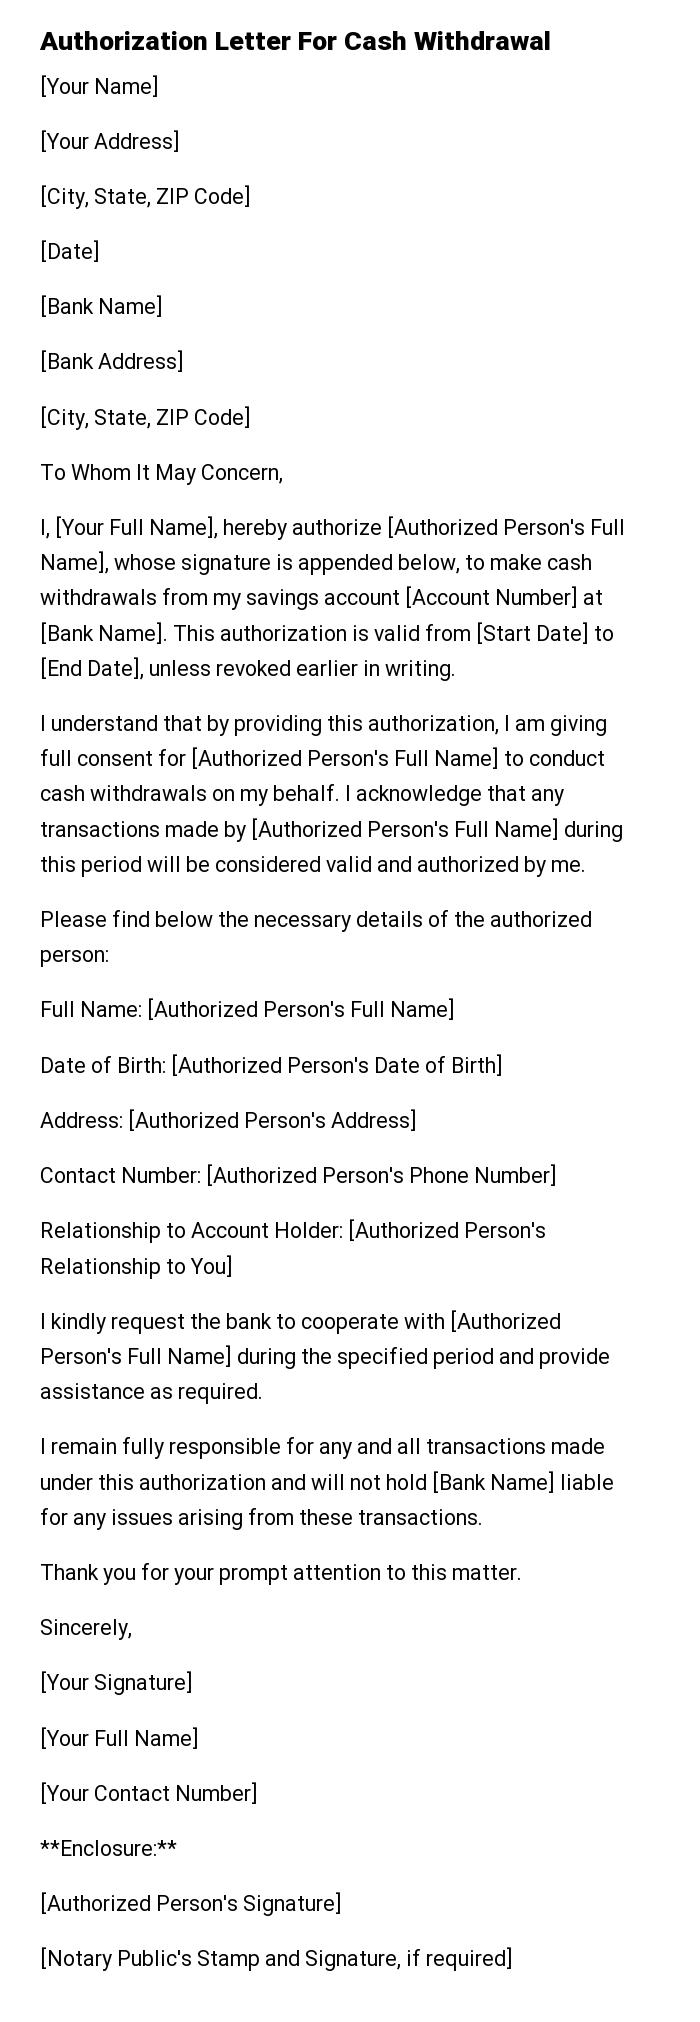 Authorization Letter For Cash Withdrawal